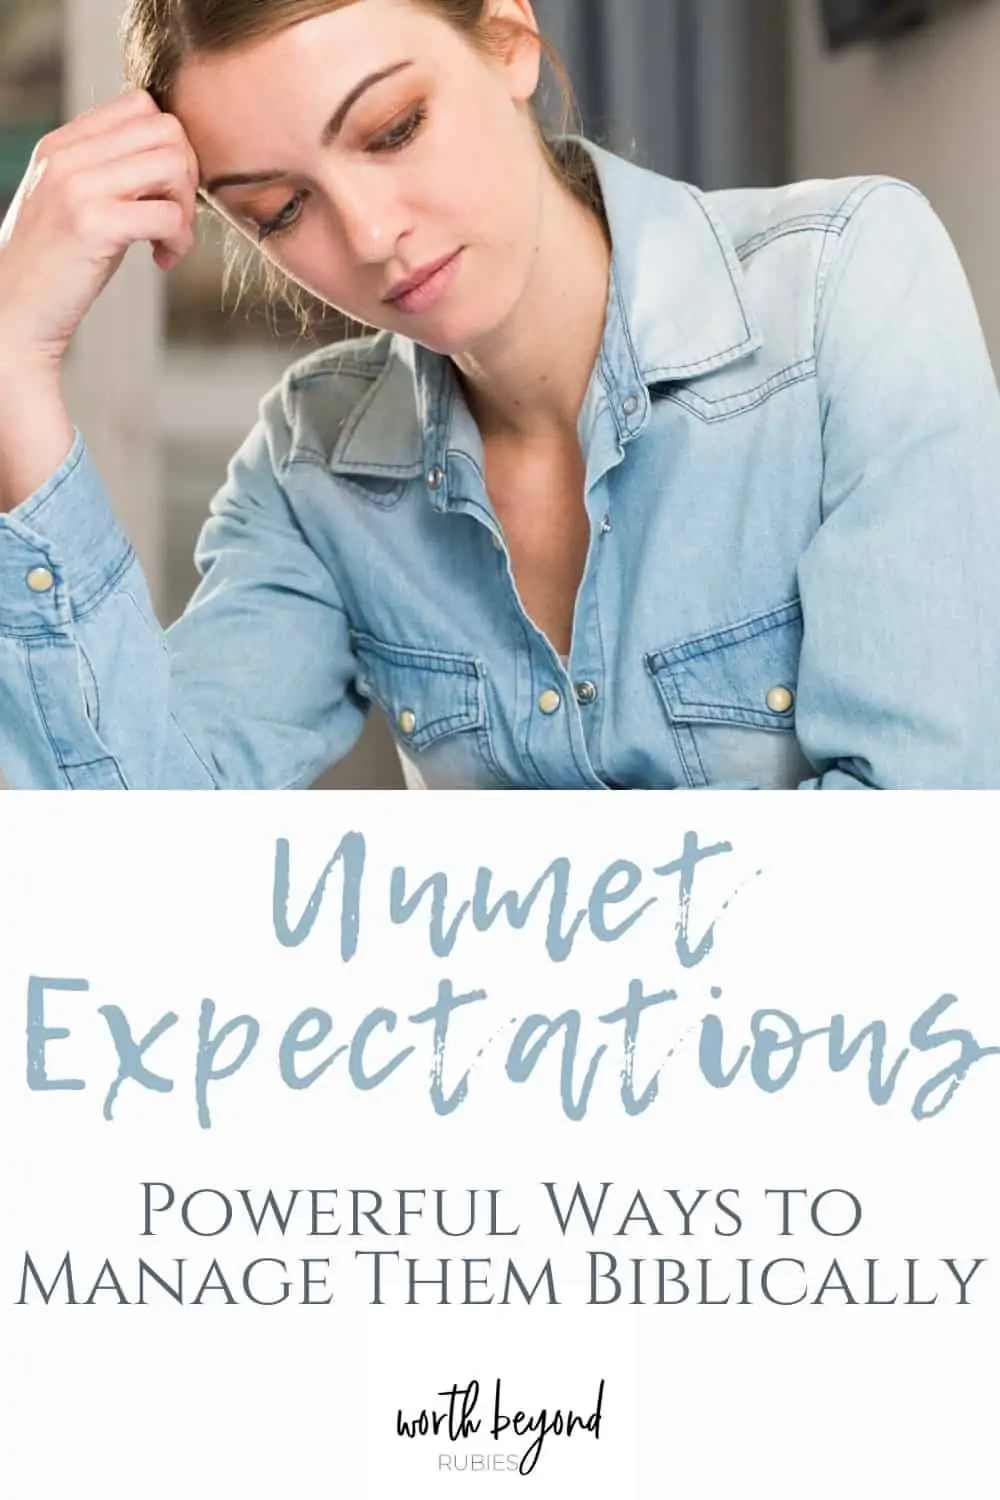 Disappointed woman sitting at table - text overlay that says Unmet Expectations - Powerful Ways to Manage Them Biblically